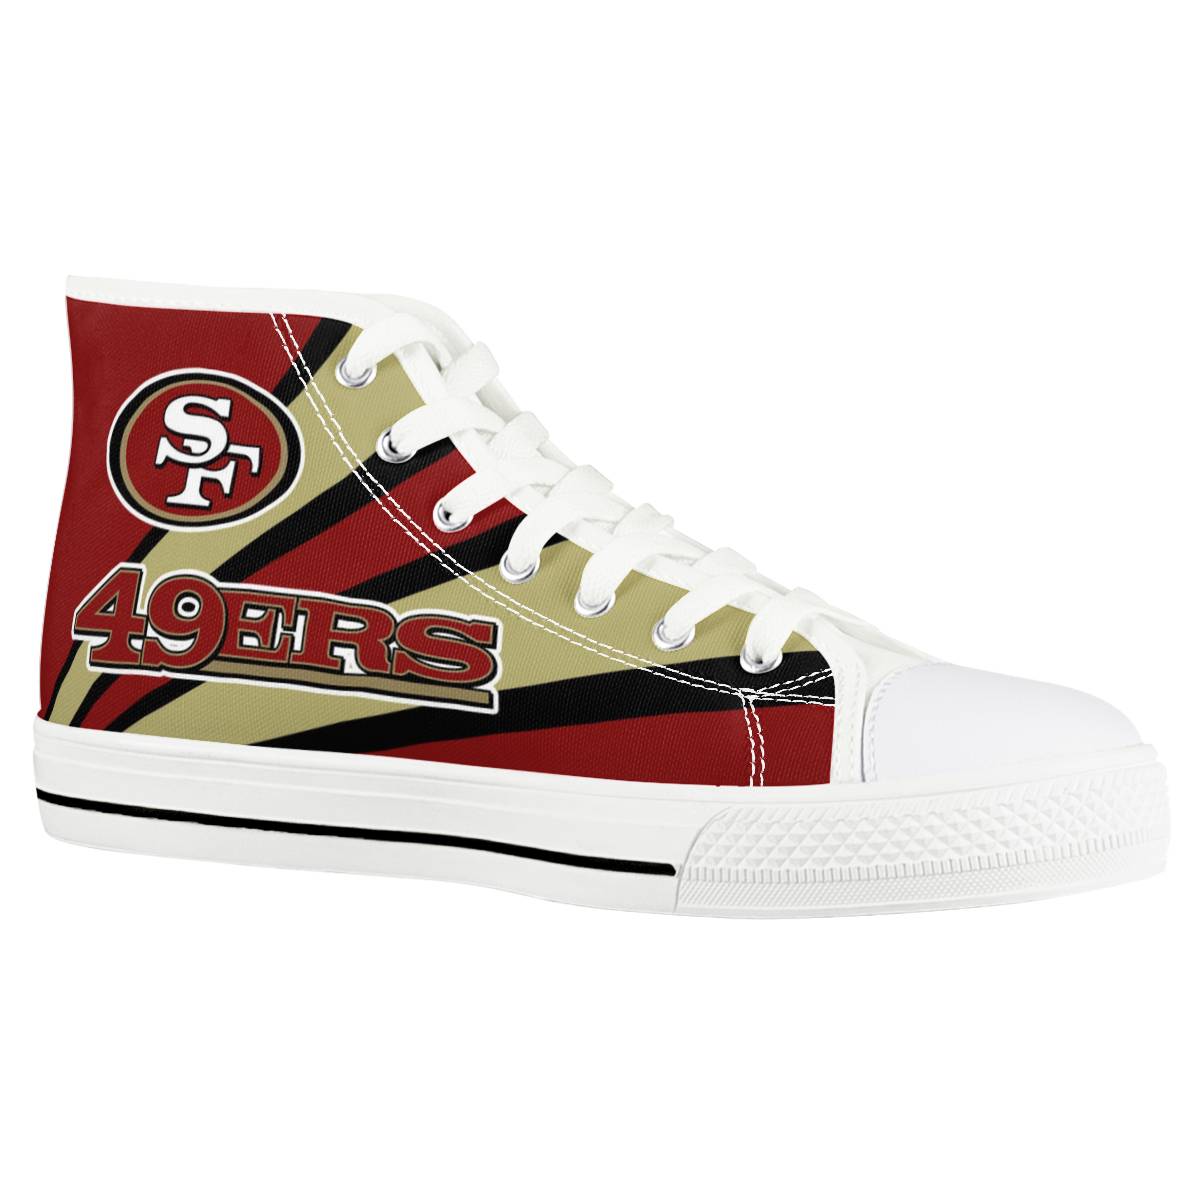 Women's San Francisco 49ers High Top Canvas Sneakers 004